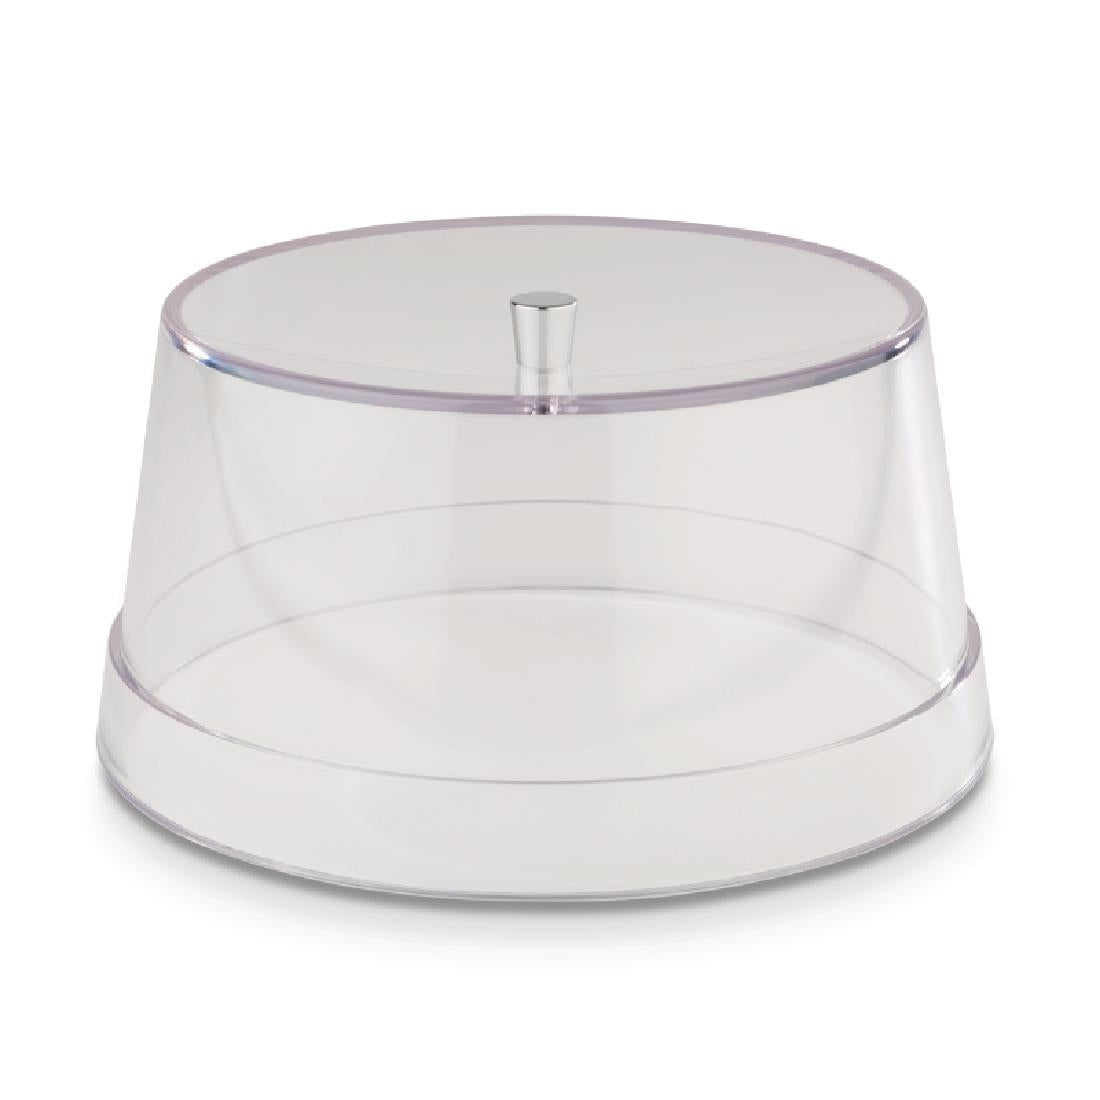 DE551 APS+ Bakery Tray Cover Clear 235mm JD Catering Equipment Solutions Ltd